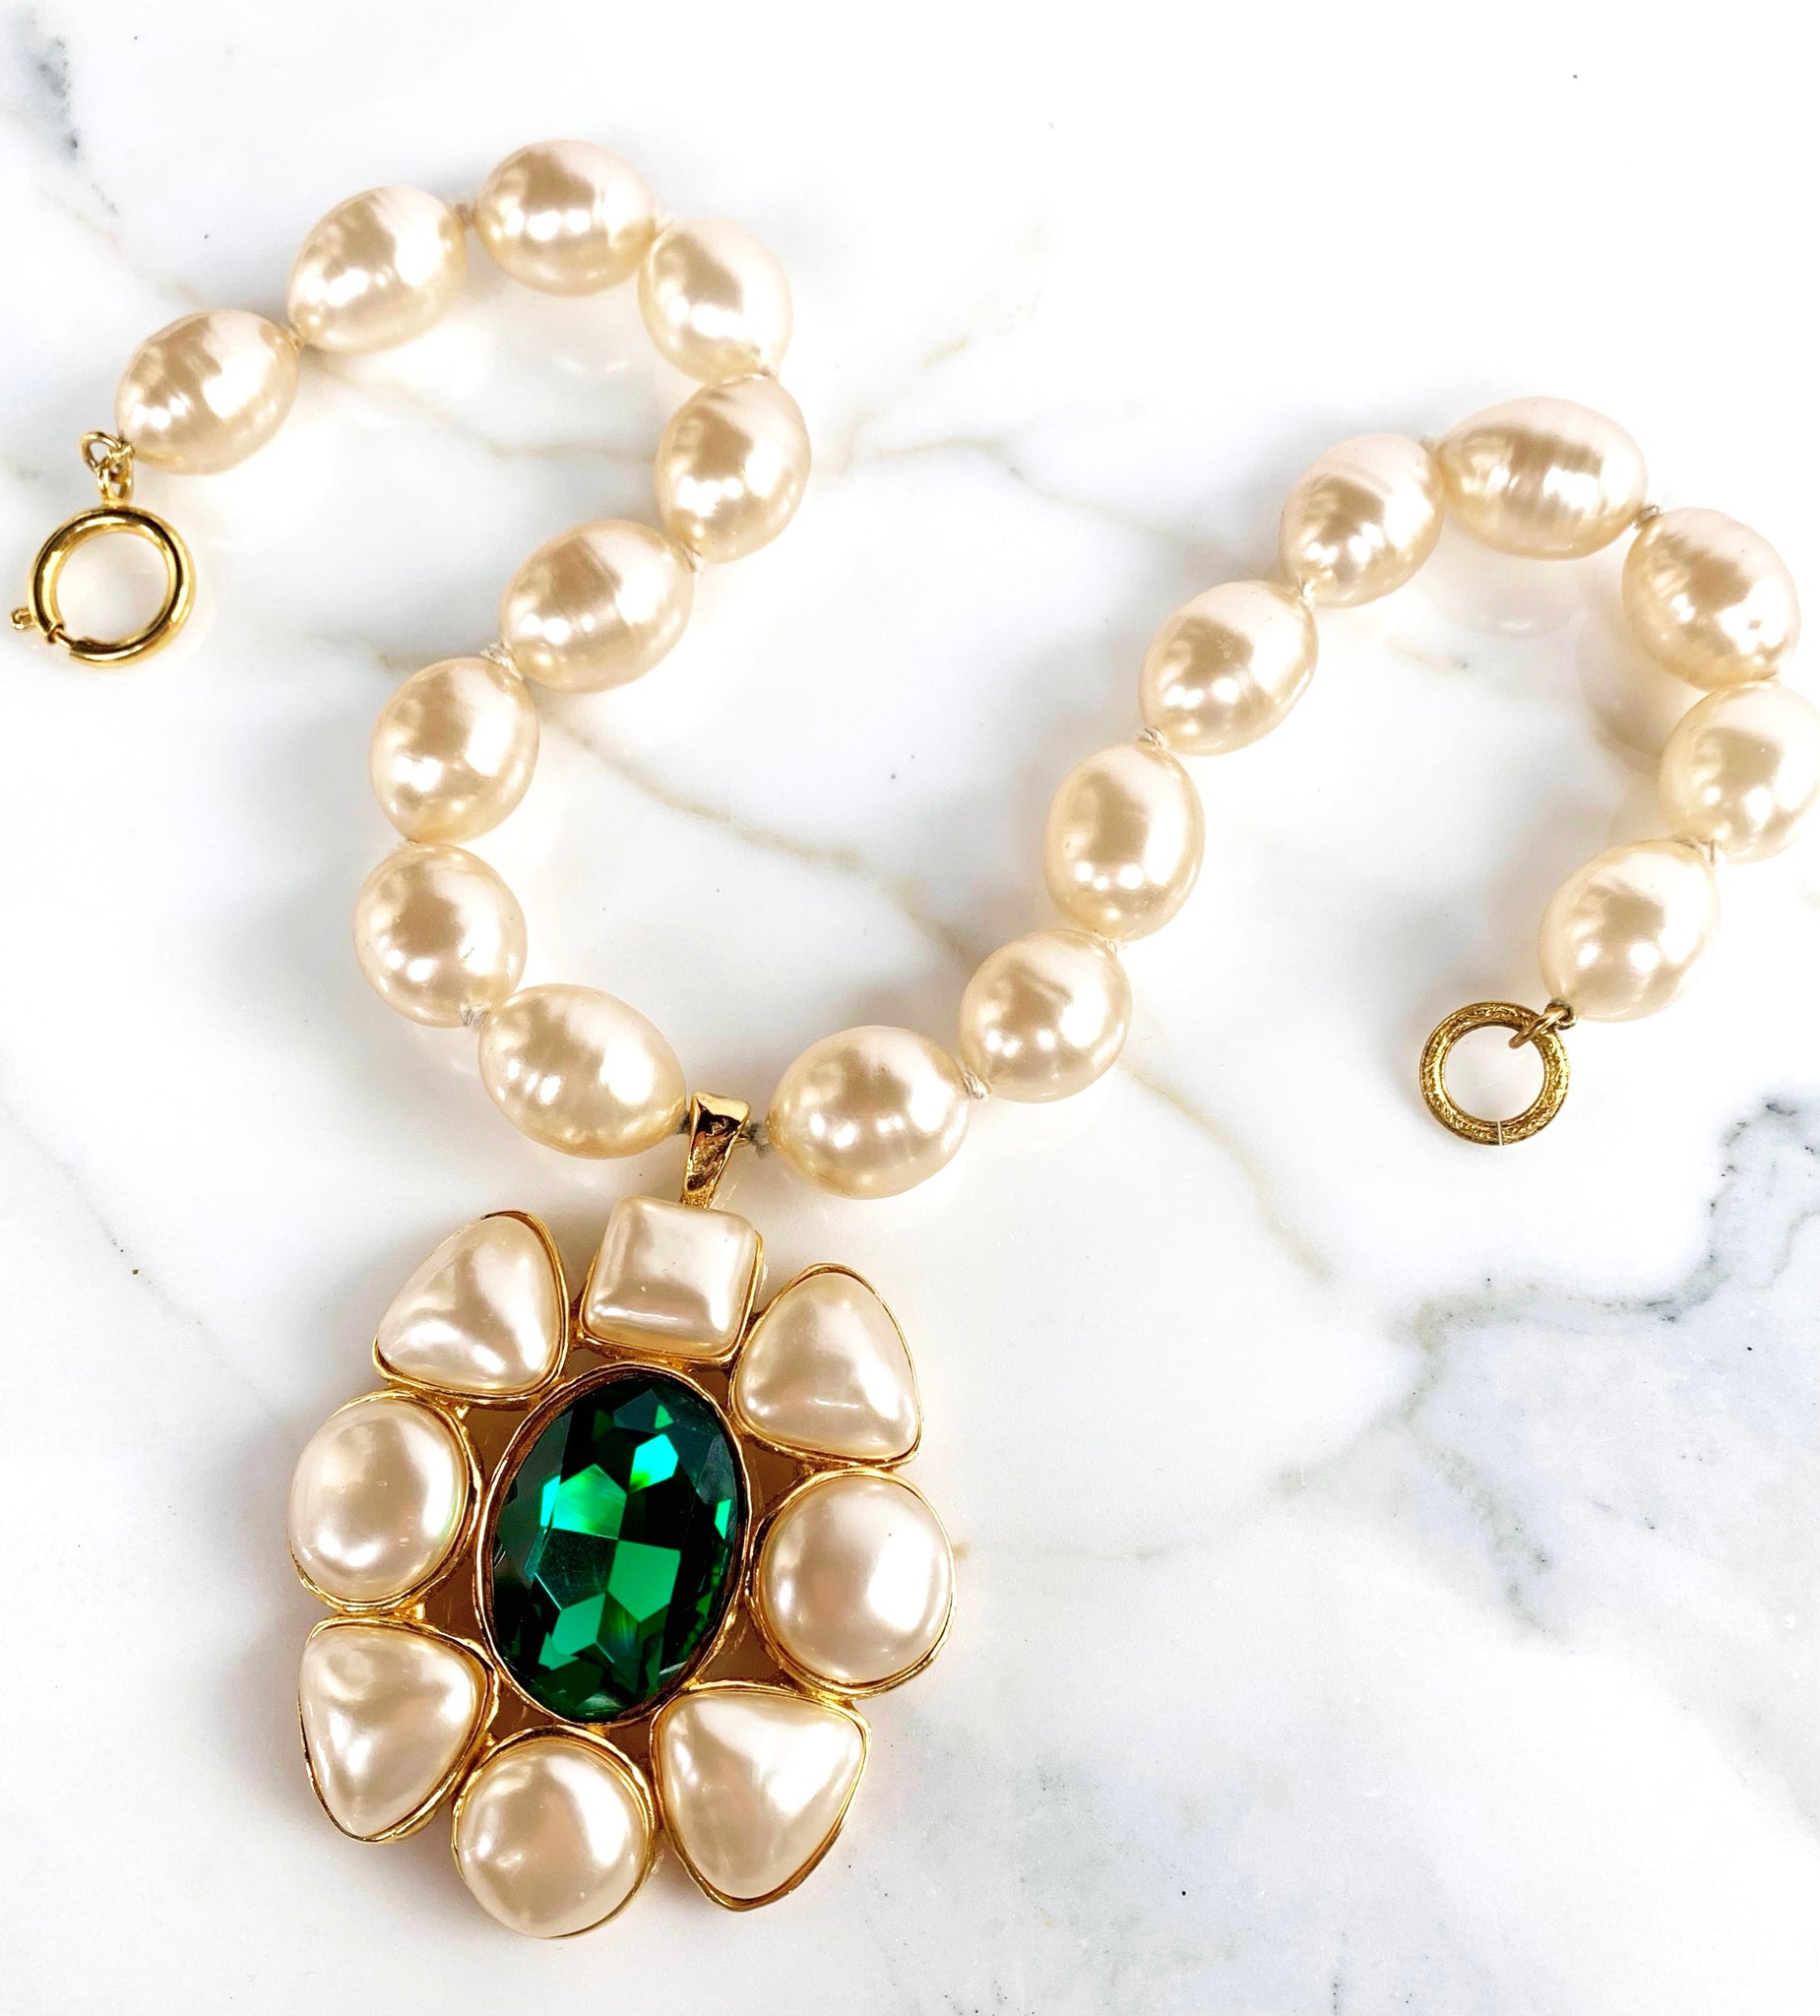 Vintage Chanel Pearl Necklace by Gripoix 